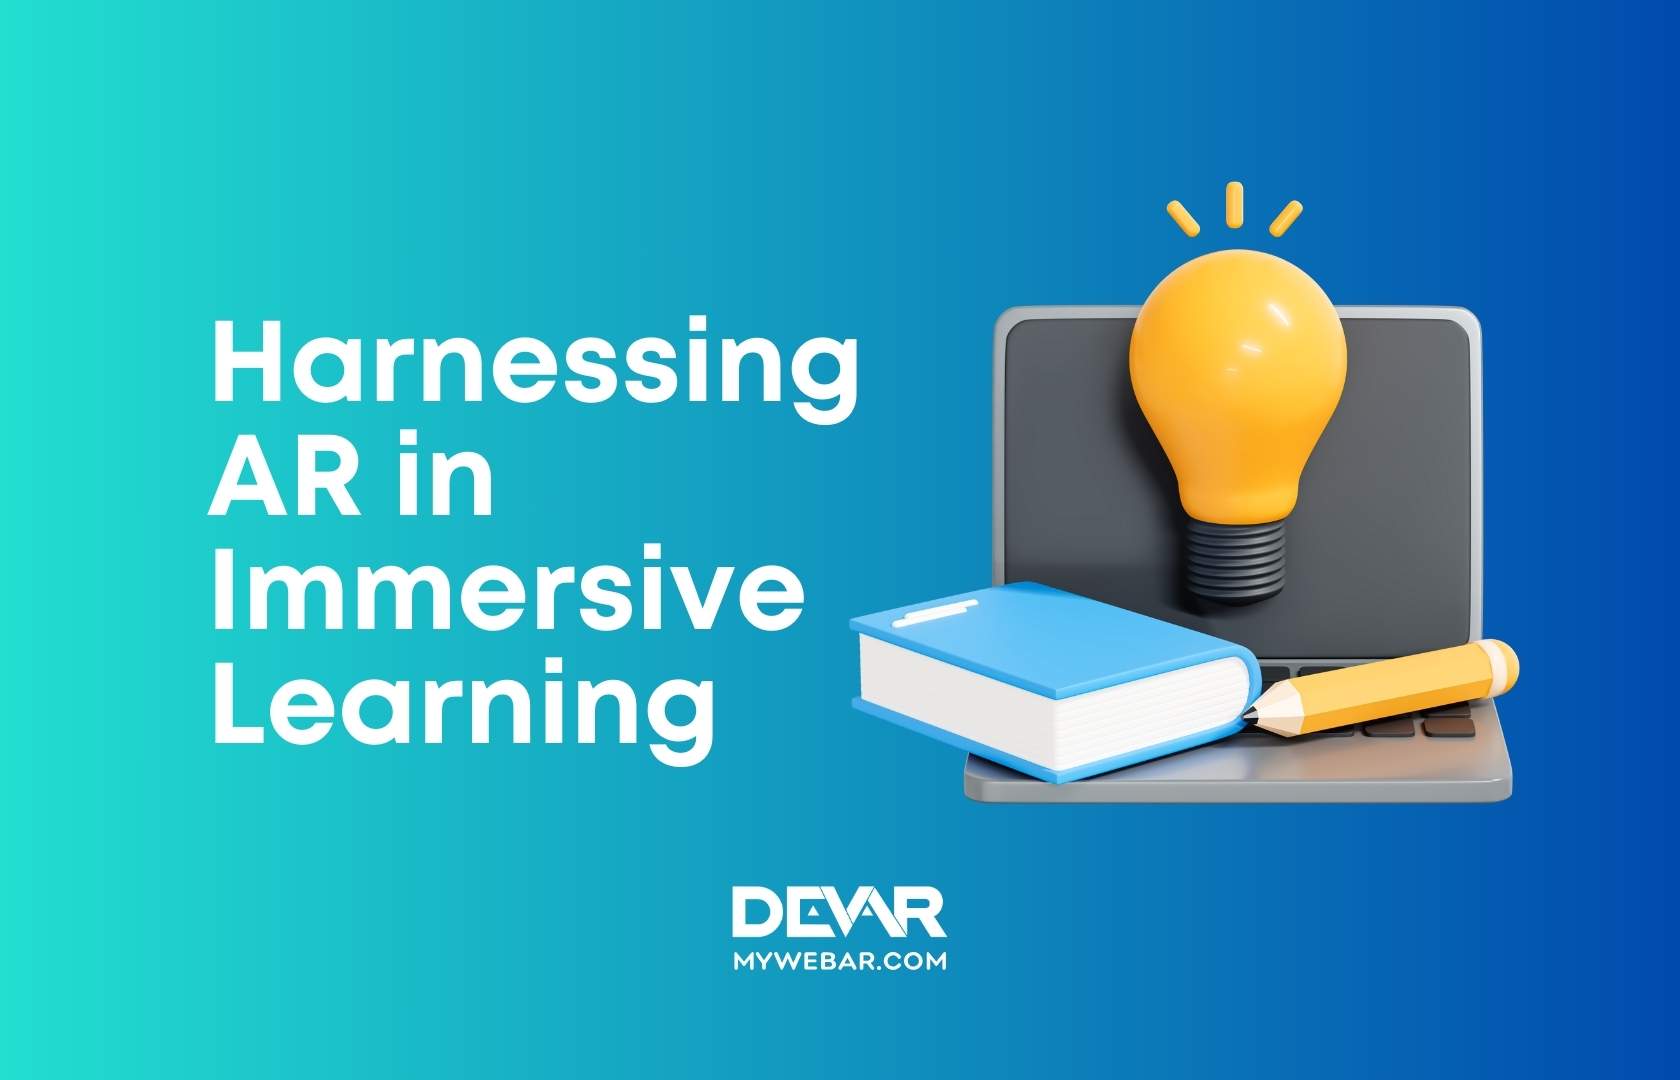 Harnessing AR in Immersive Learning